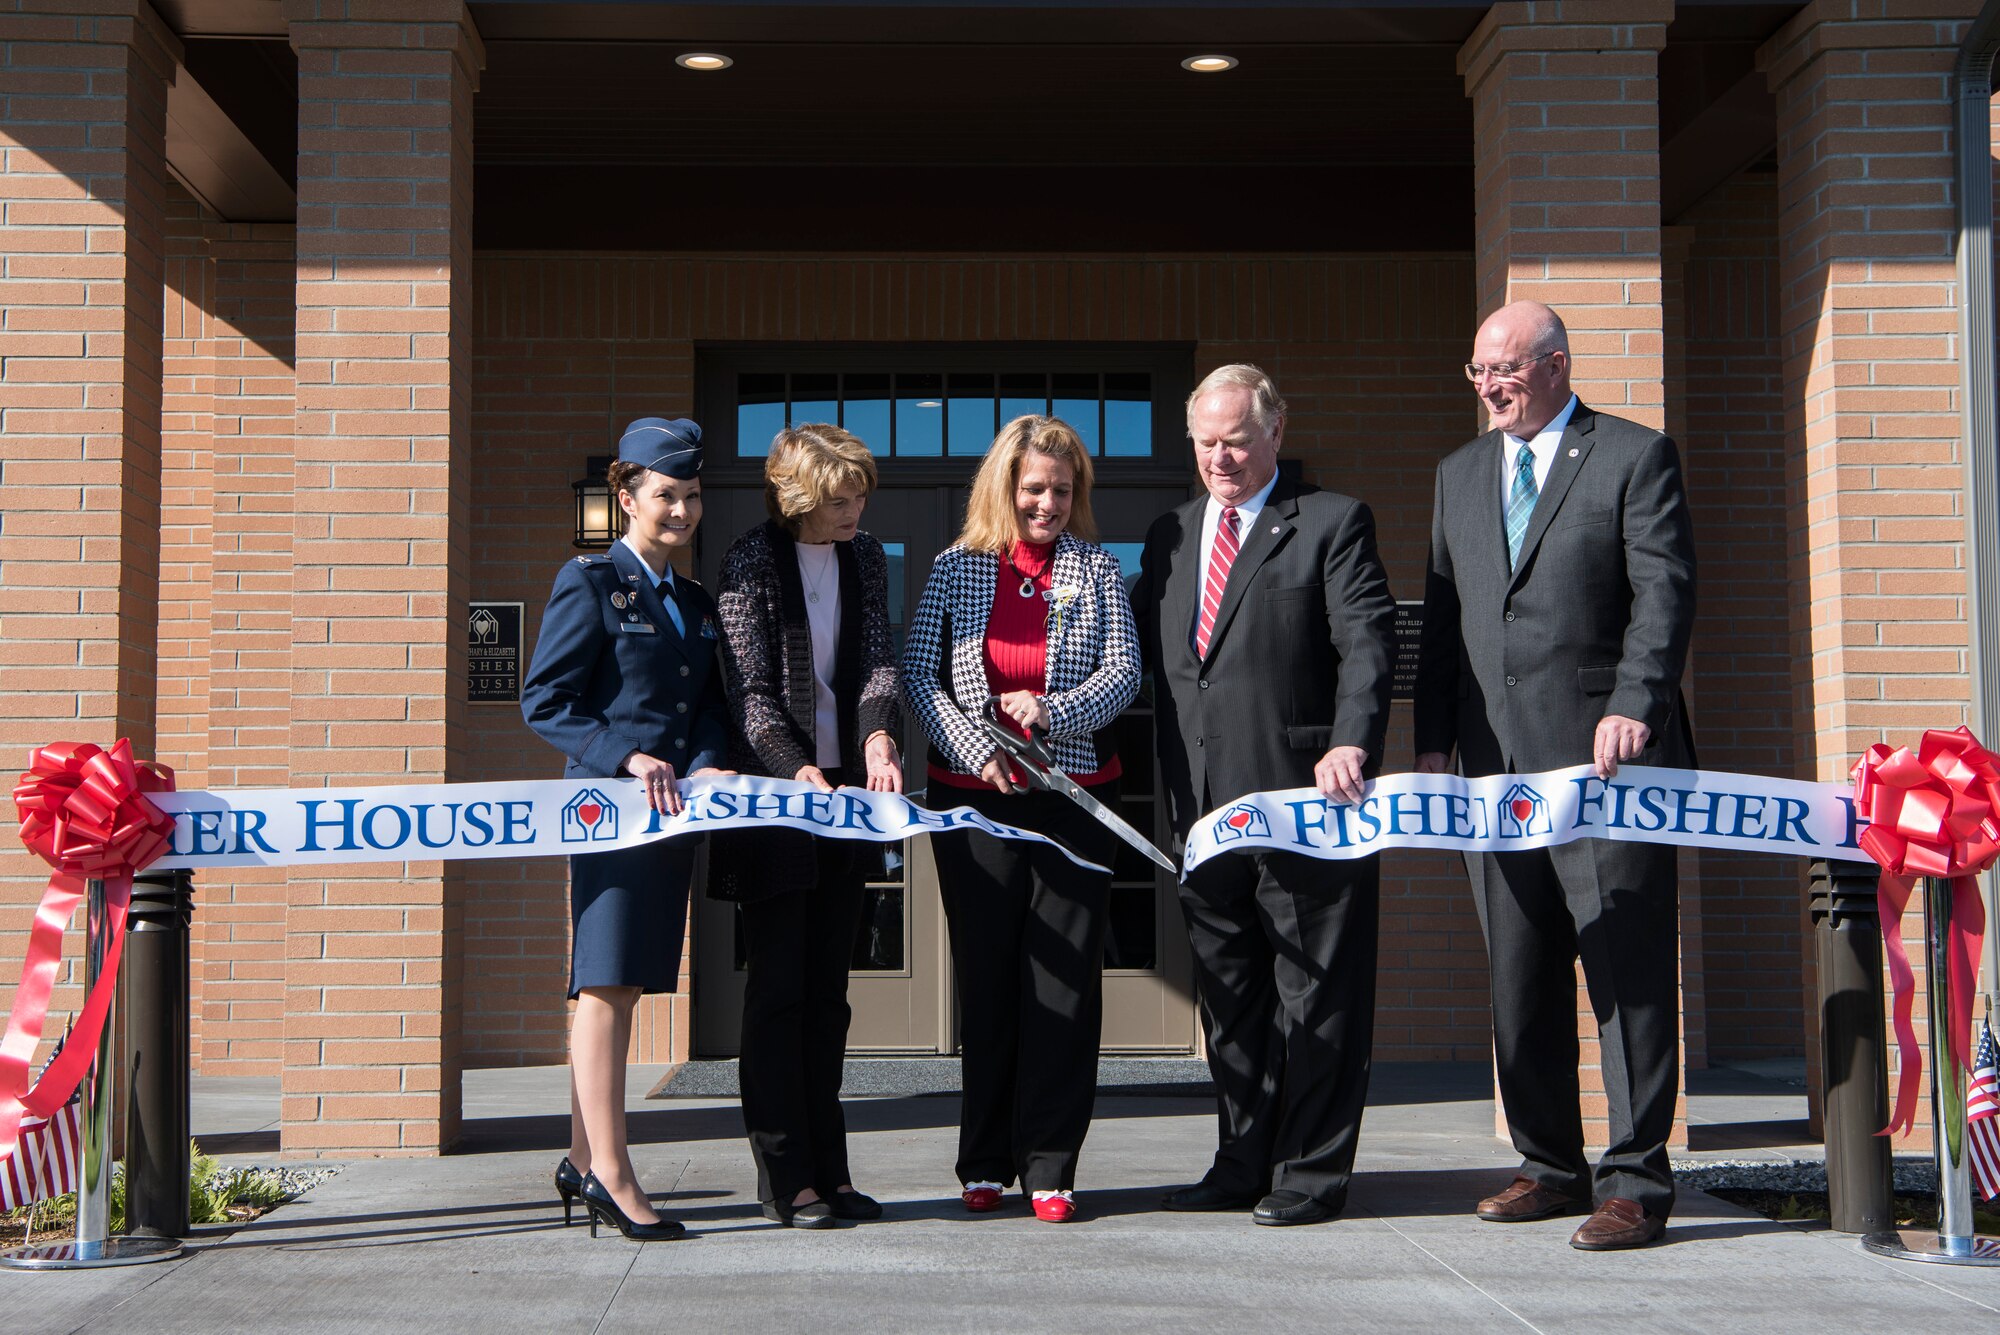 From the left, U.S. Air Force Col. Patricia Csànk, 673d Air Base Wing and Joint Base Elmendorf-Richardson commander; U.S. Senator Lisa Murkowski; Jenny Hall, Fisher House manager; Terry Parks, Friends of Fisher House president, and David Coker, Fisher House Foundation president, participate in a ribbon-cutting ceremony for Fisher House II at JBER, Alaska, Sep. 10, 2018. Fisher House II features a two-story building with more than 14,000 square feet – 16 suites which include a private bedroom and bath, a shared family room, living room, and common kitchen, and laundry facilities for families.